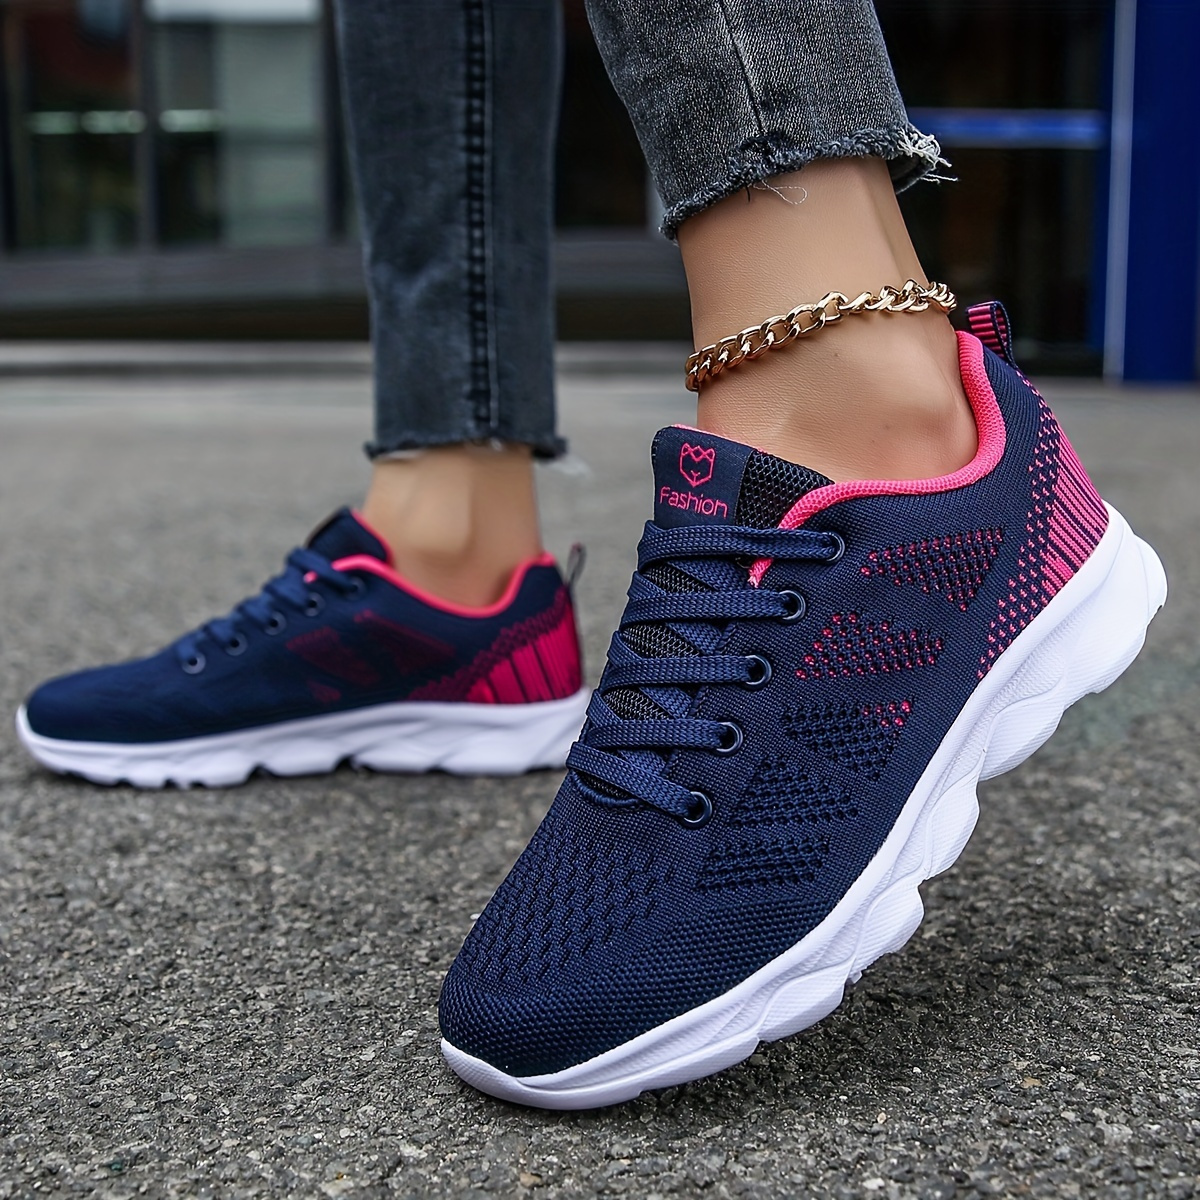 Women's Breathable Mesh Sneakers, Fashion Color Block Lace Up Non